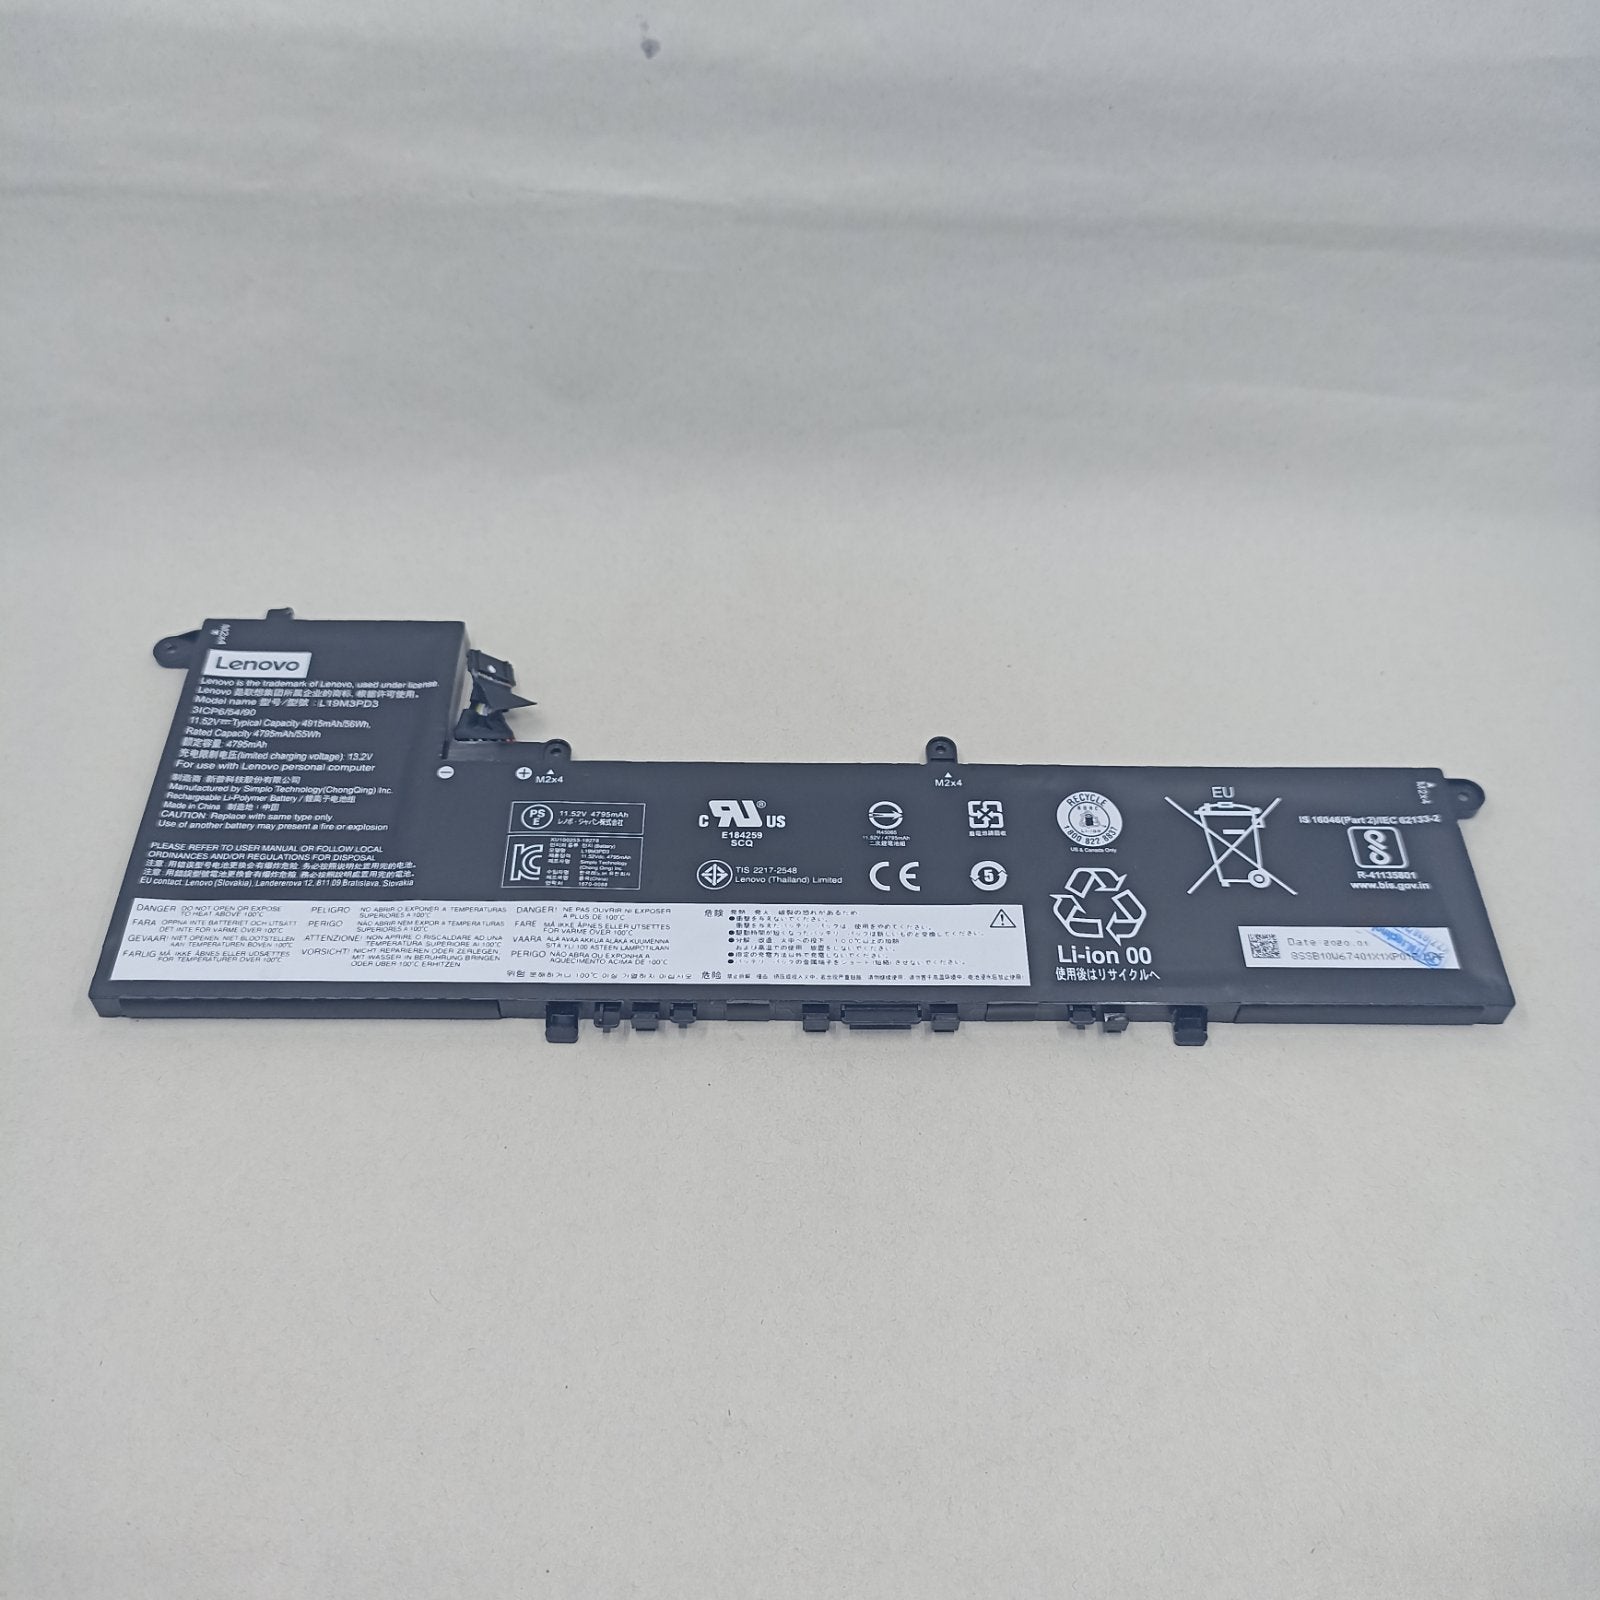 Replacement Battery for Lenovo S540-13IML A1